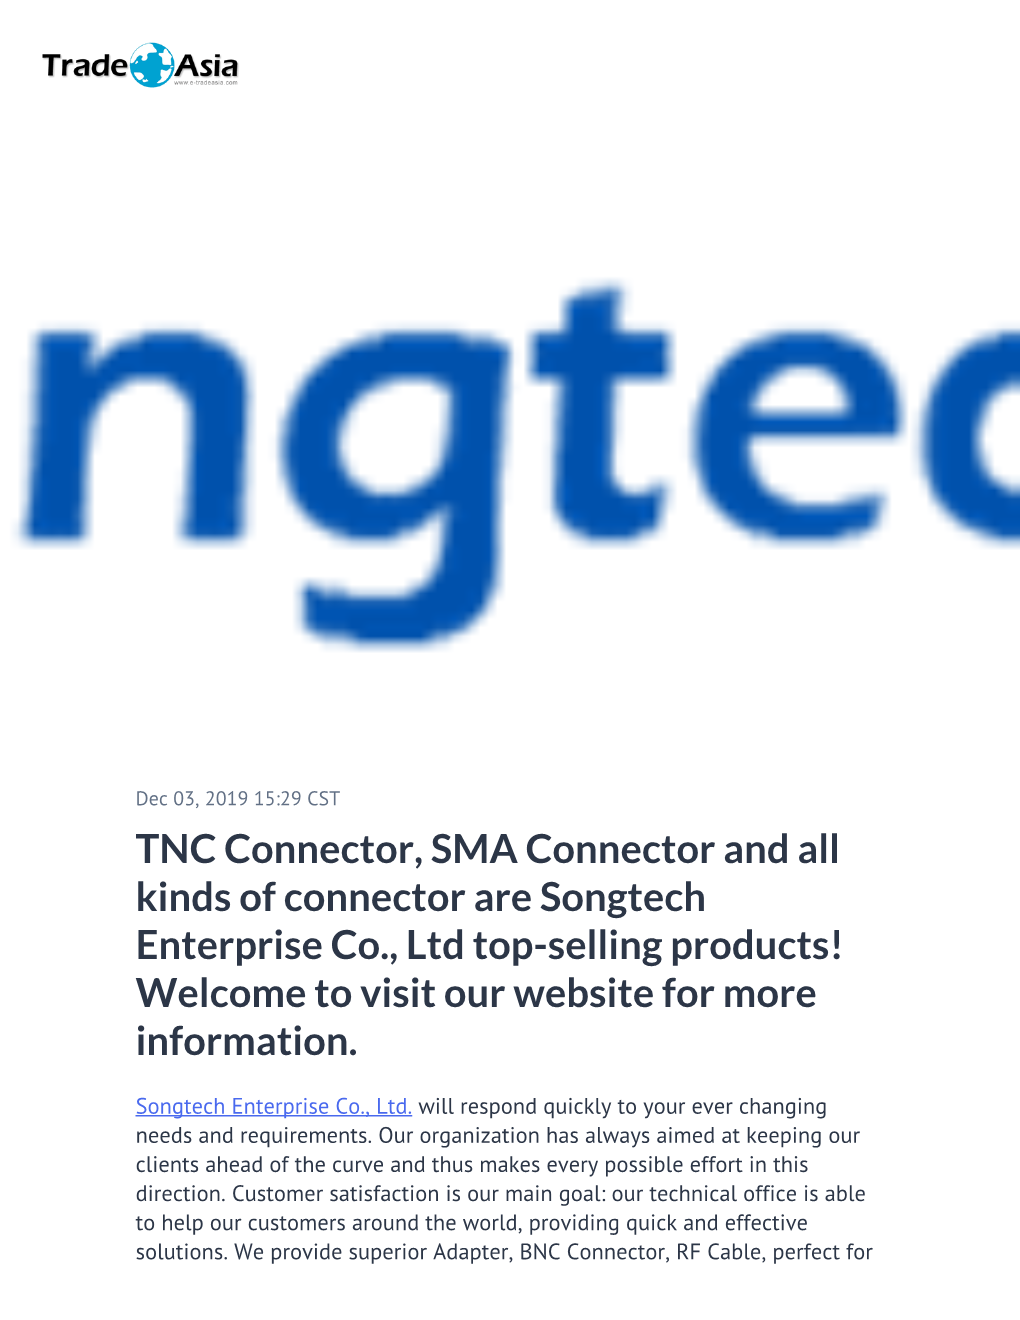 TNC Connector, SMA Connector and All Kinds of Connector Are Songtech Enterprise Co., Ltd Top-Selling Products! Welcome to Visit Our Website for More Information